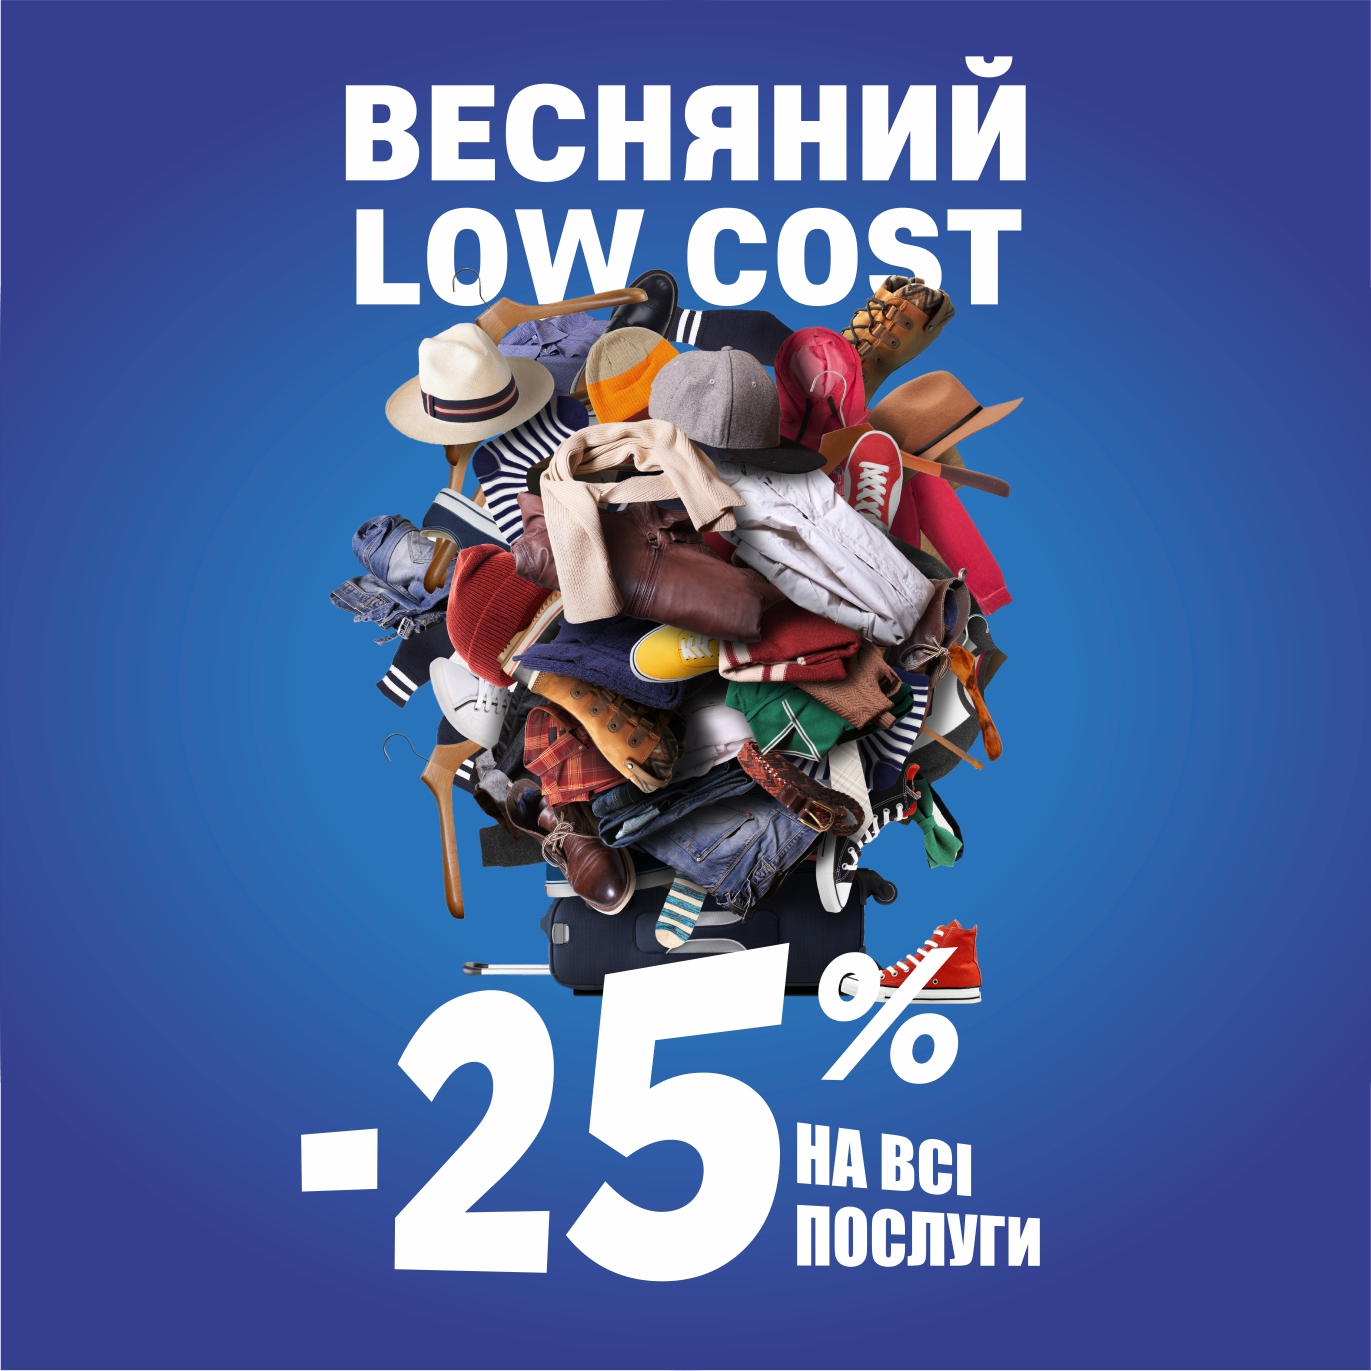  Low Cost -25%   